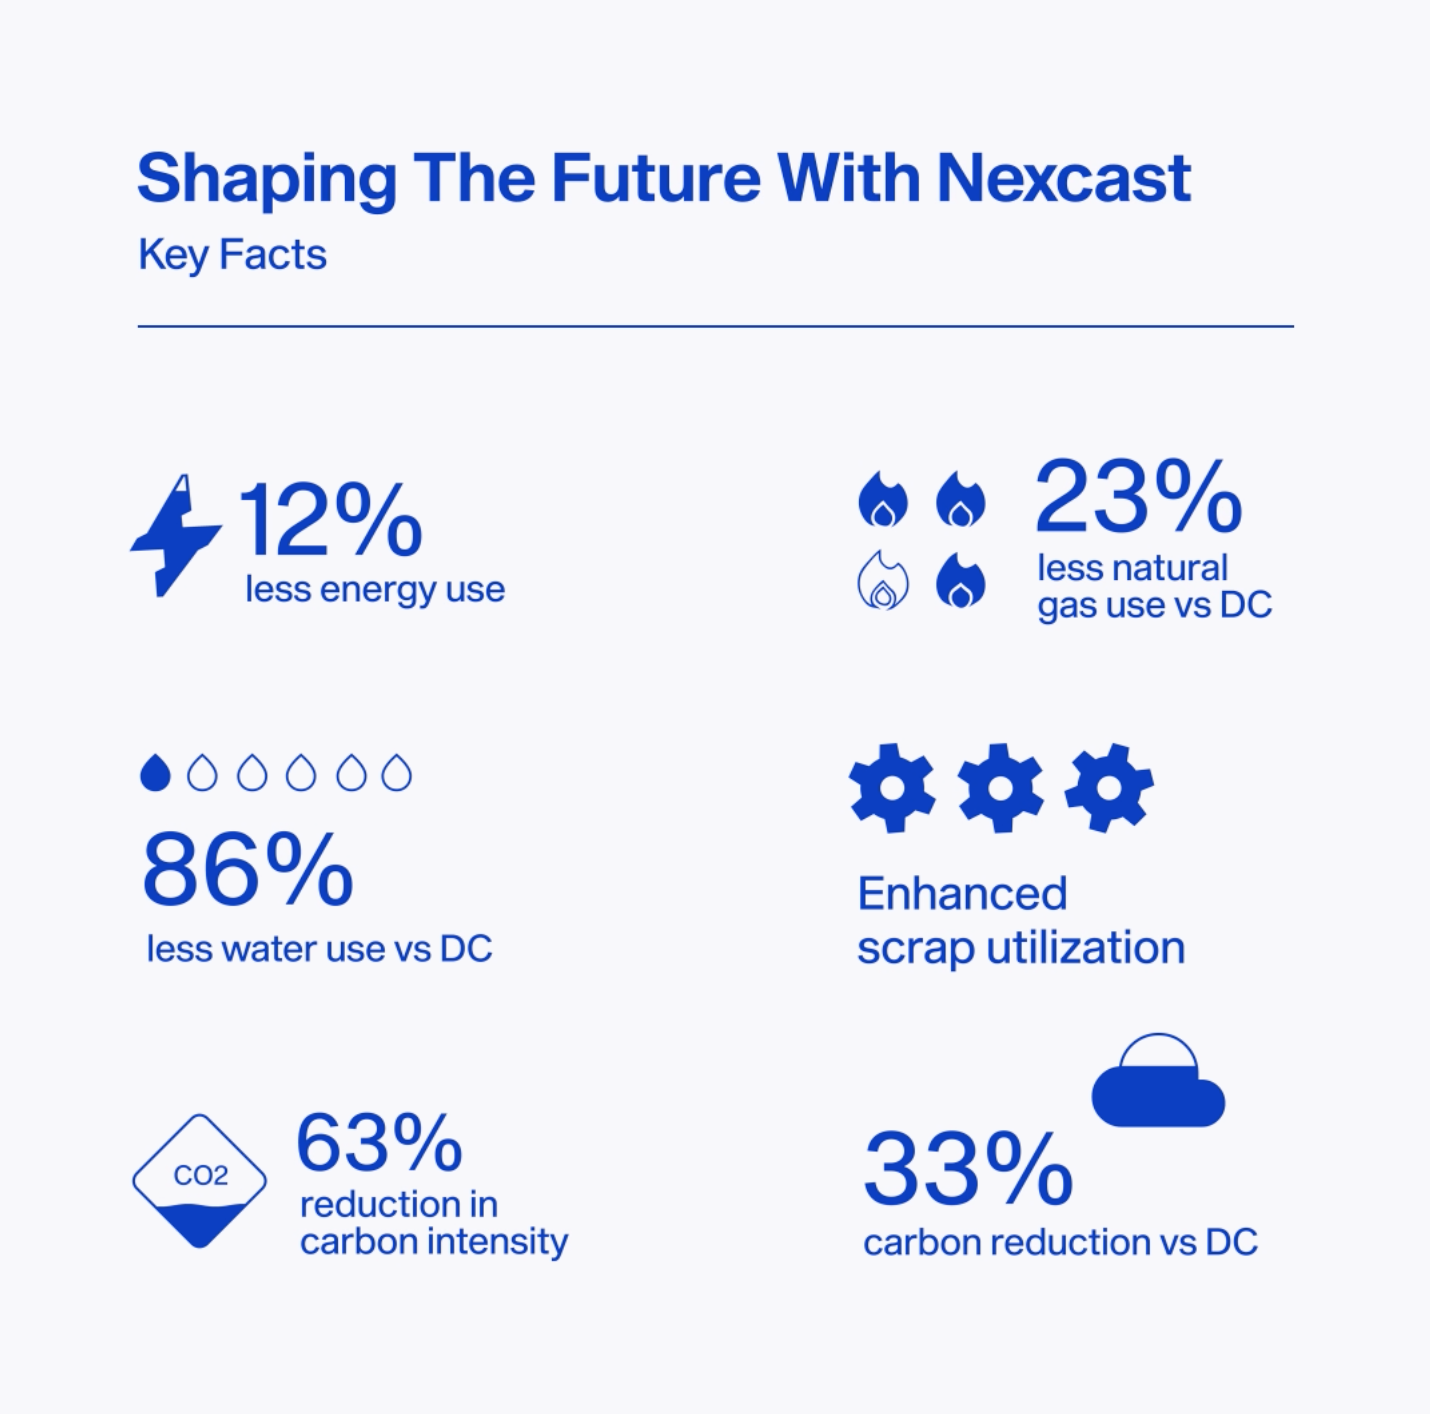 Infographic highlighting key facts about Nexcast technology’s benefits: energy, water, and gas savings, and carbon reduction.